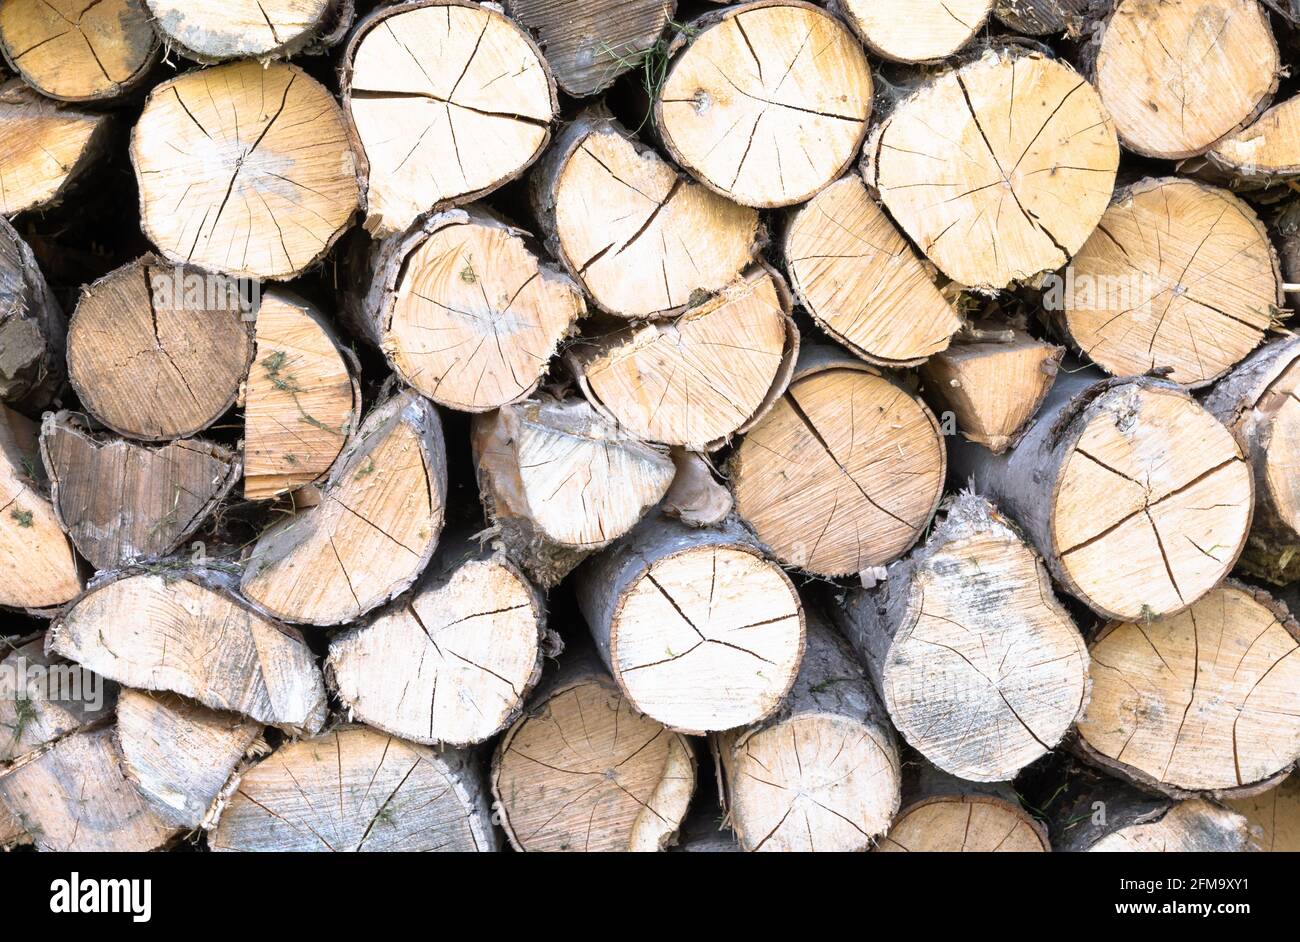 Wood logs stacked up in a pile Stock Photo